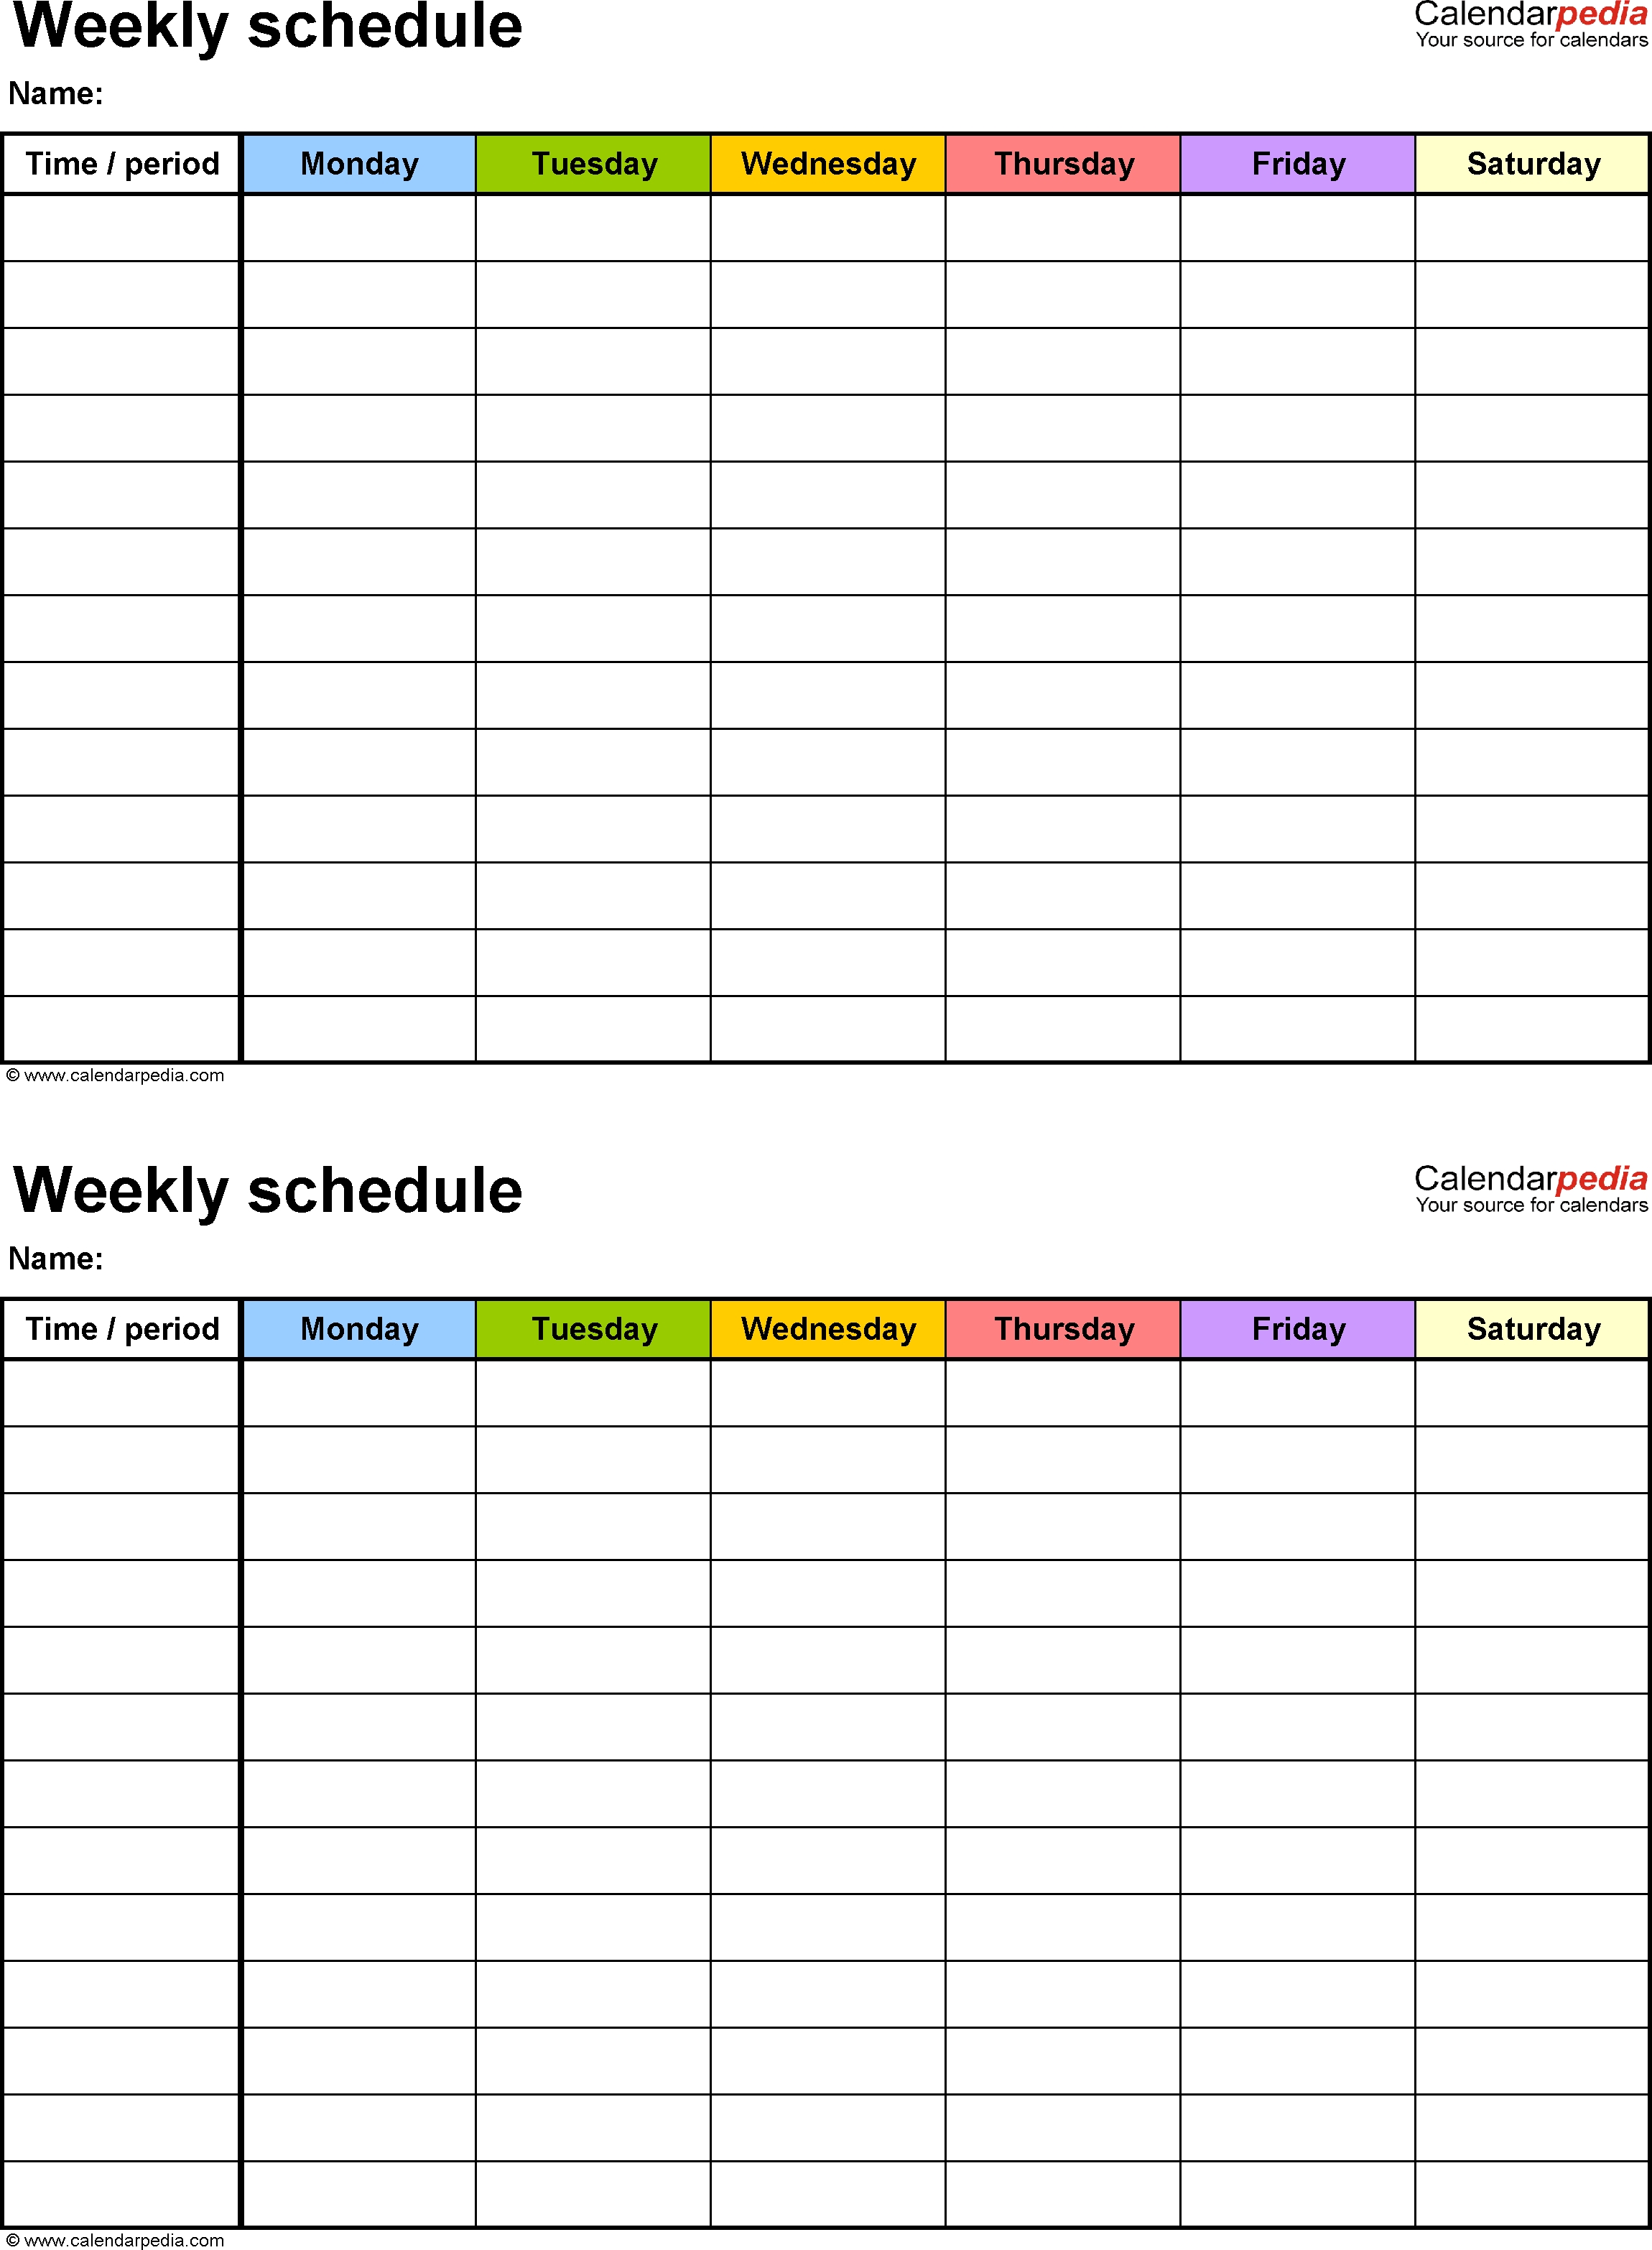 Free Weekly Schedule Templates For Excel - 18 Templates 4 Day Calendar Template